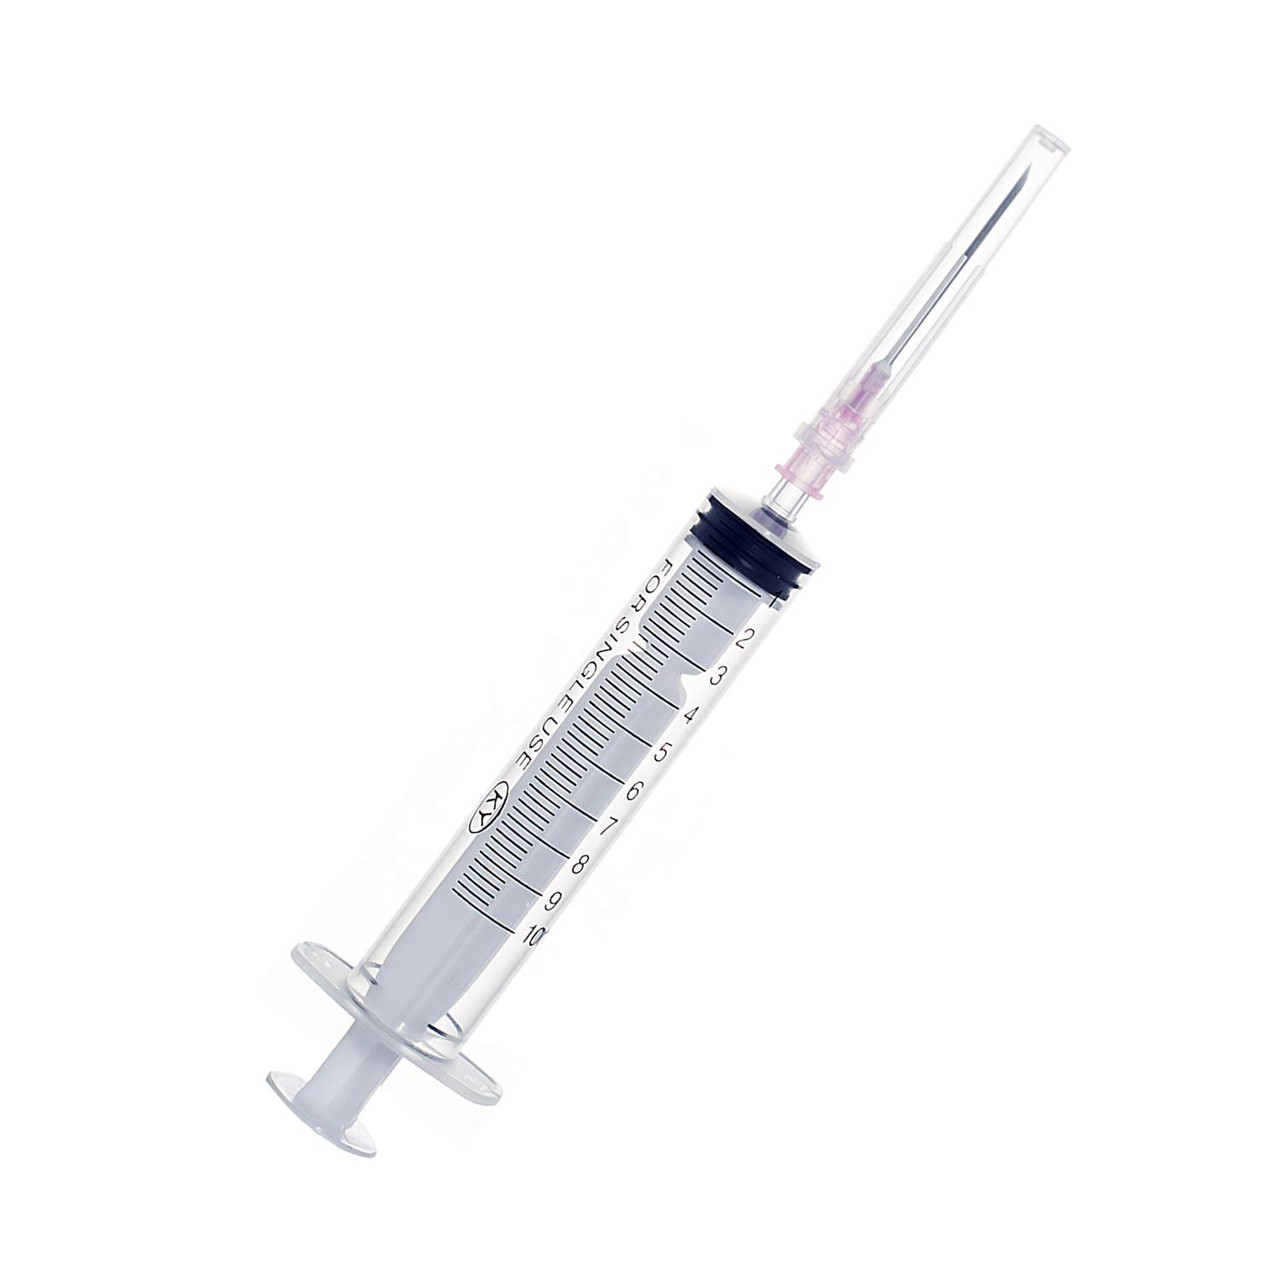 Plastic Syringes - economical and disposable for all scientific